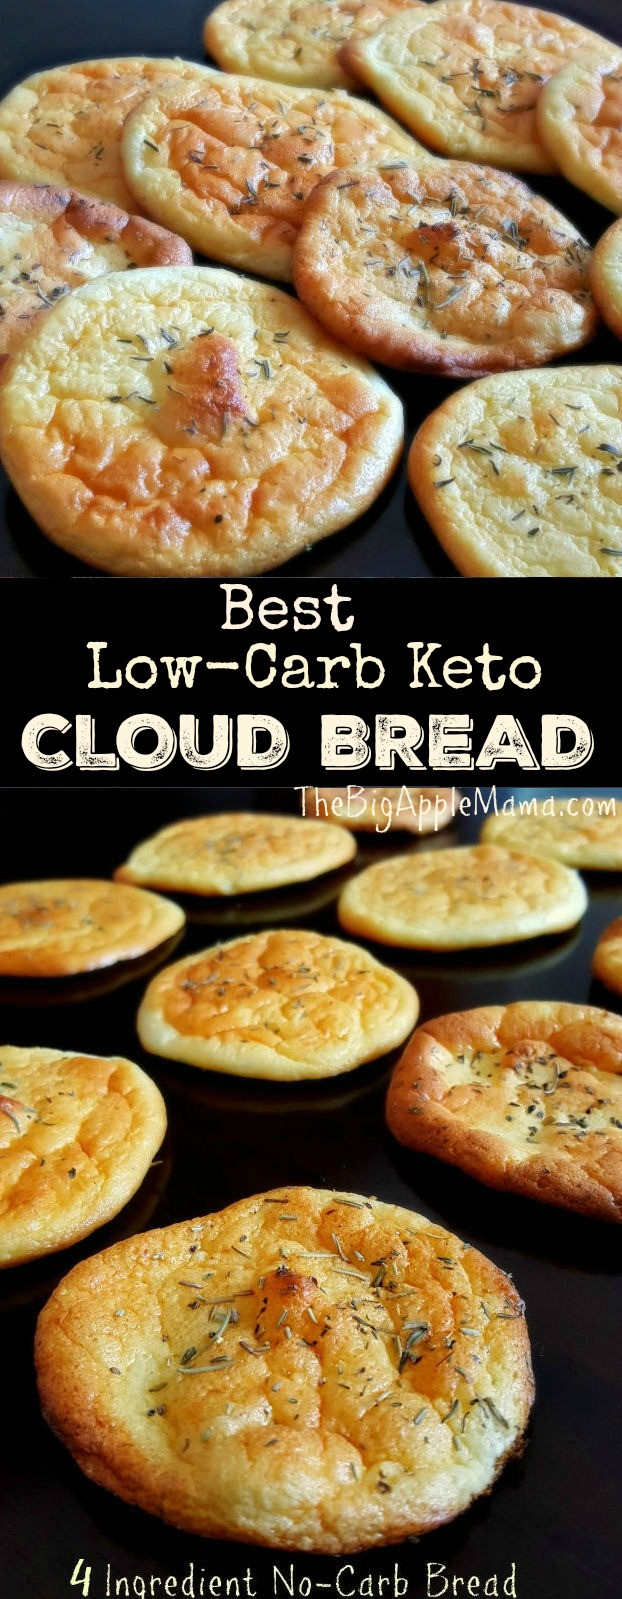 Buy Low Carb Bread
 The Best No Carb Cloud Bread with only 4 Ingre nts